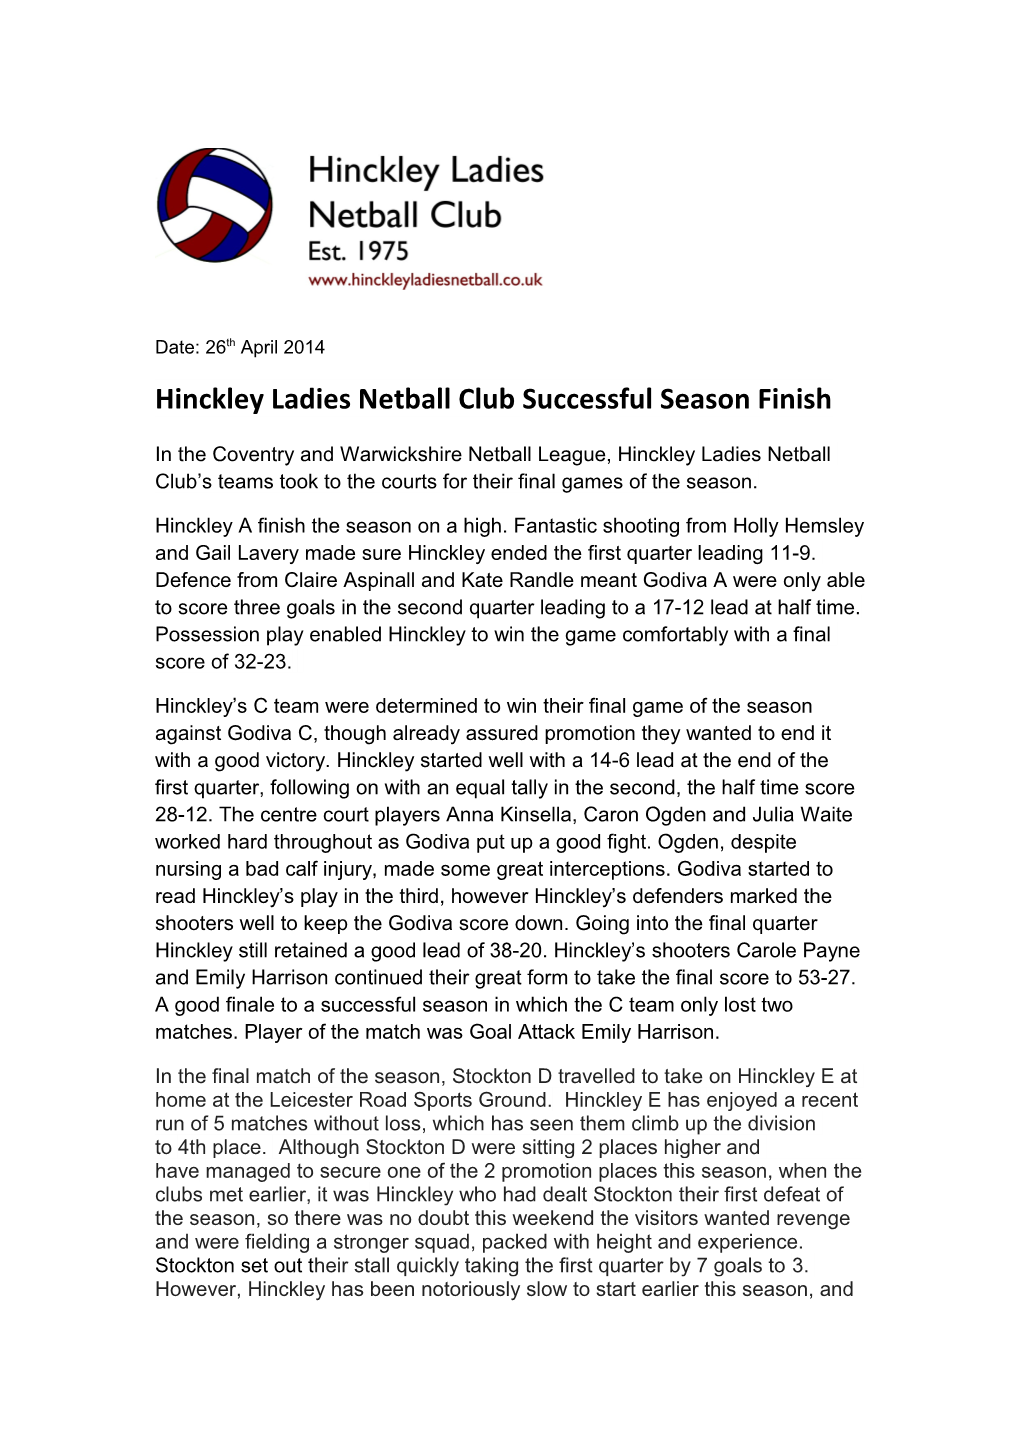 Hinckley Ladies Netball Club Start the New Season with A s1